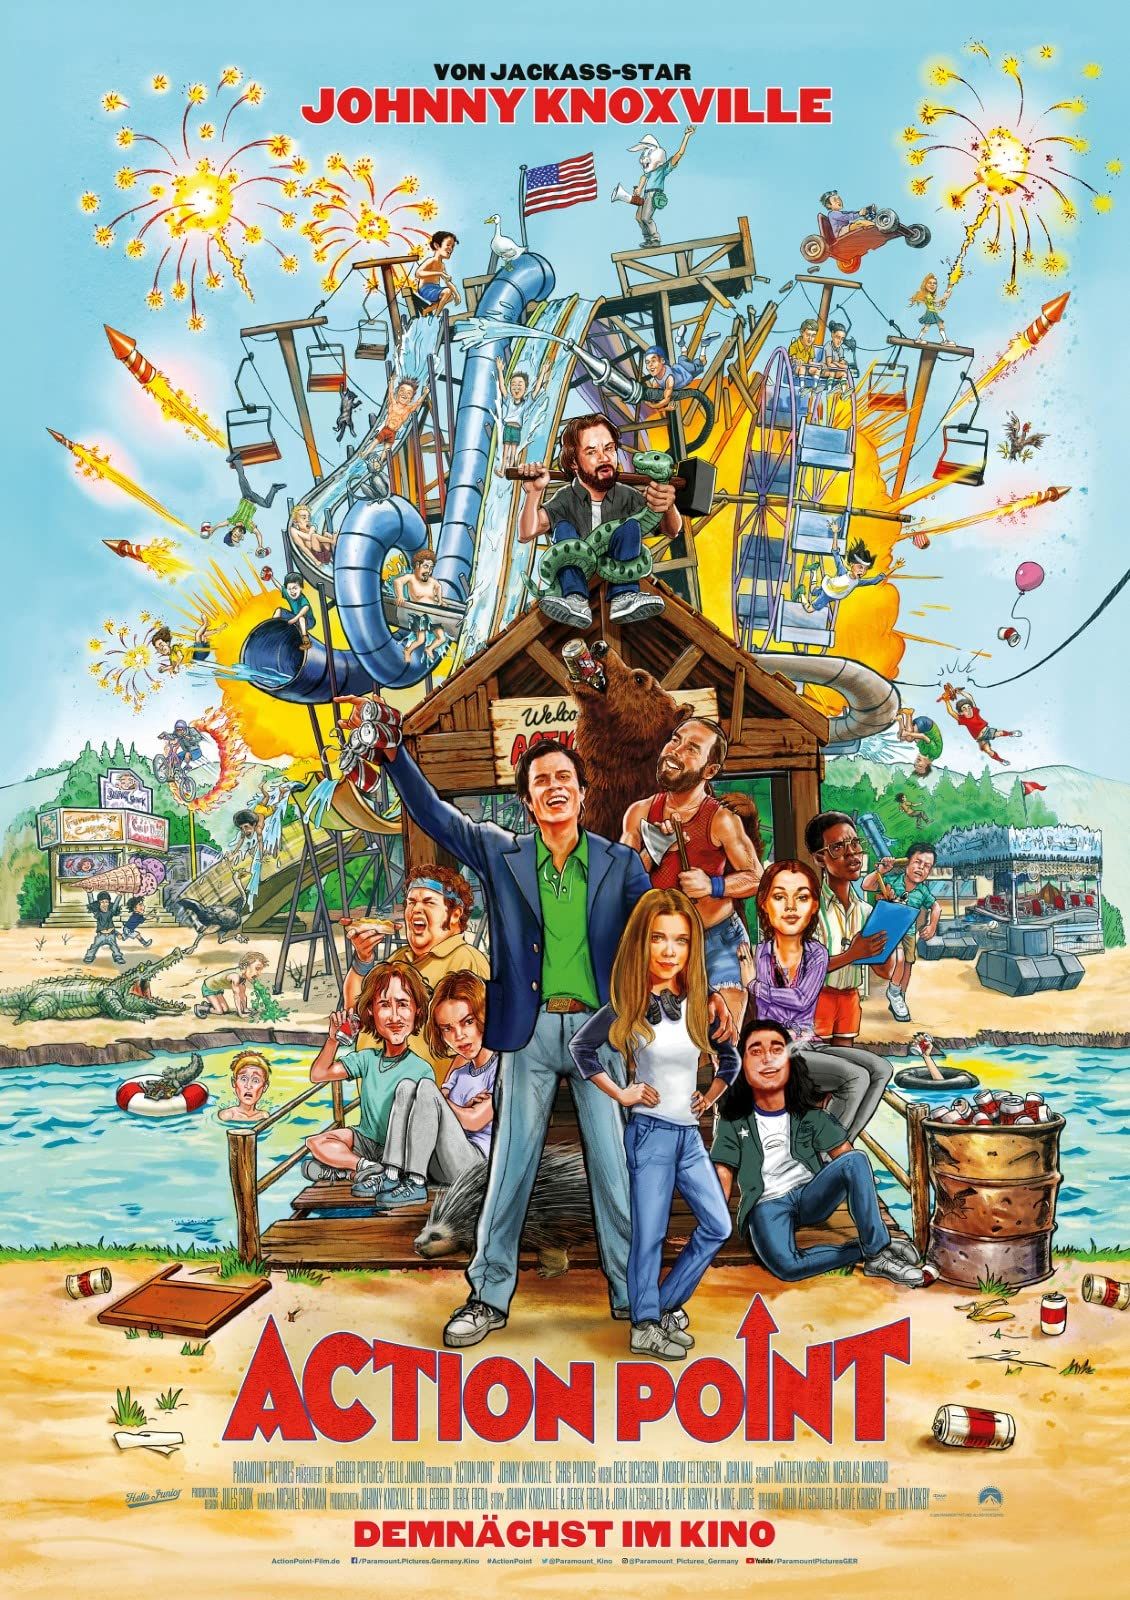 Action Point (2018) Hindi Dubbed BluRay download full movie